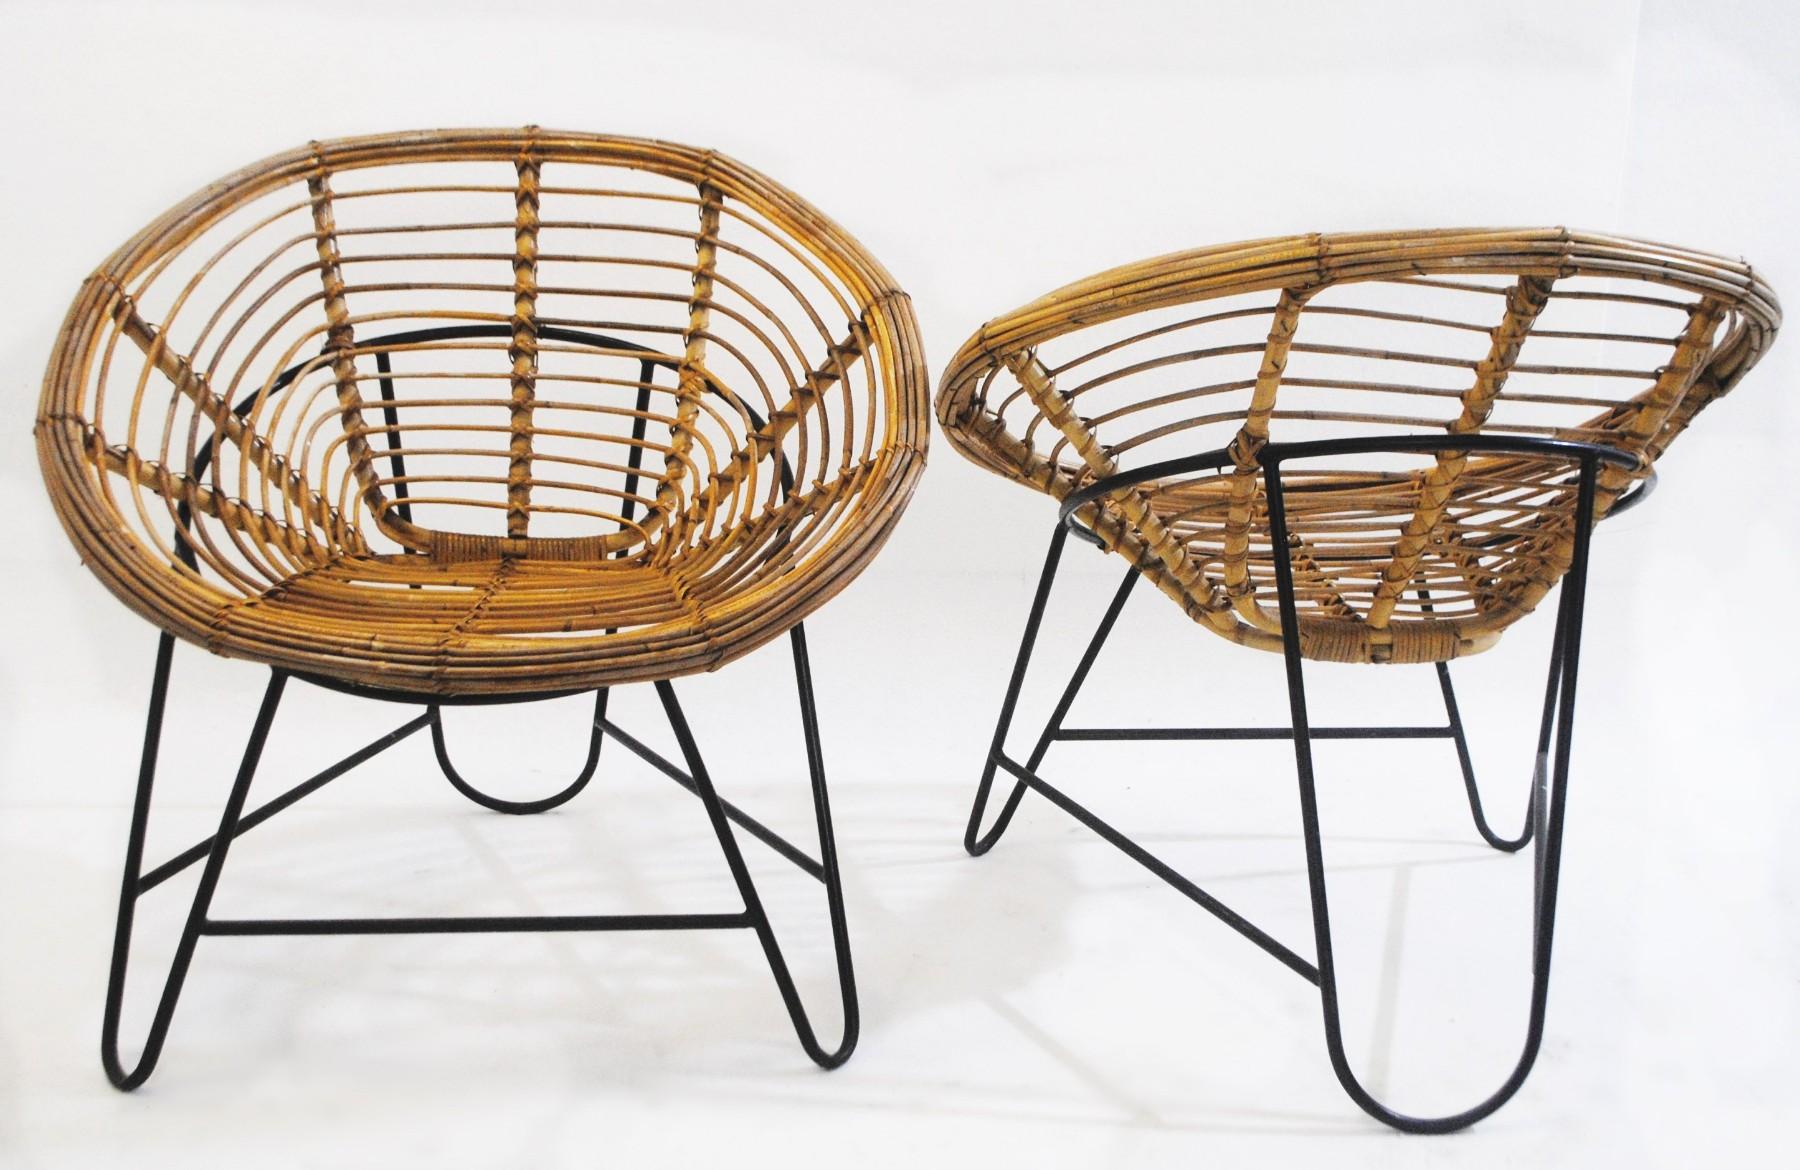 Lovely and comfy pair of rattan armchairs.